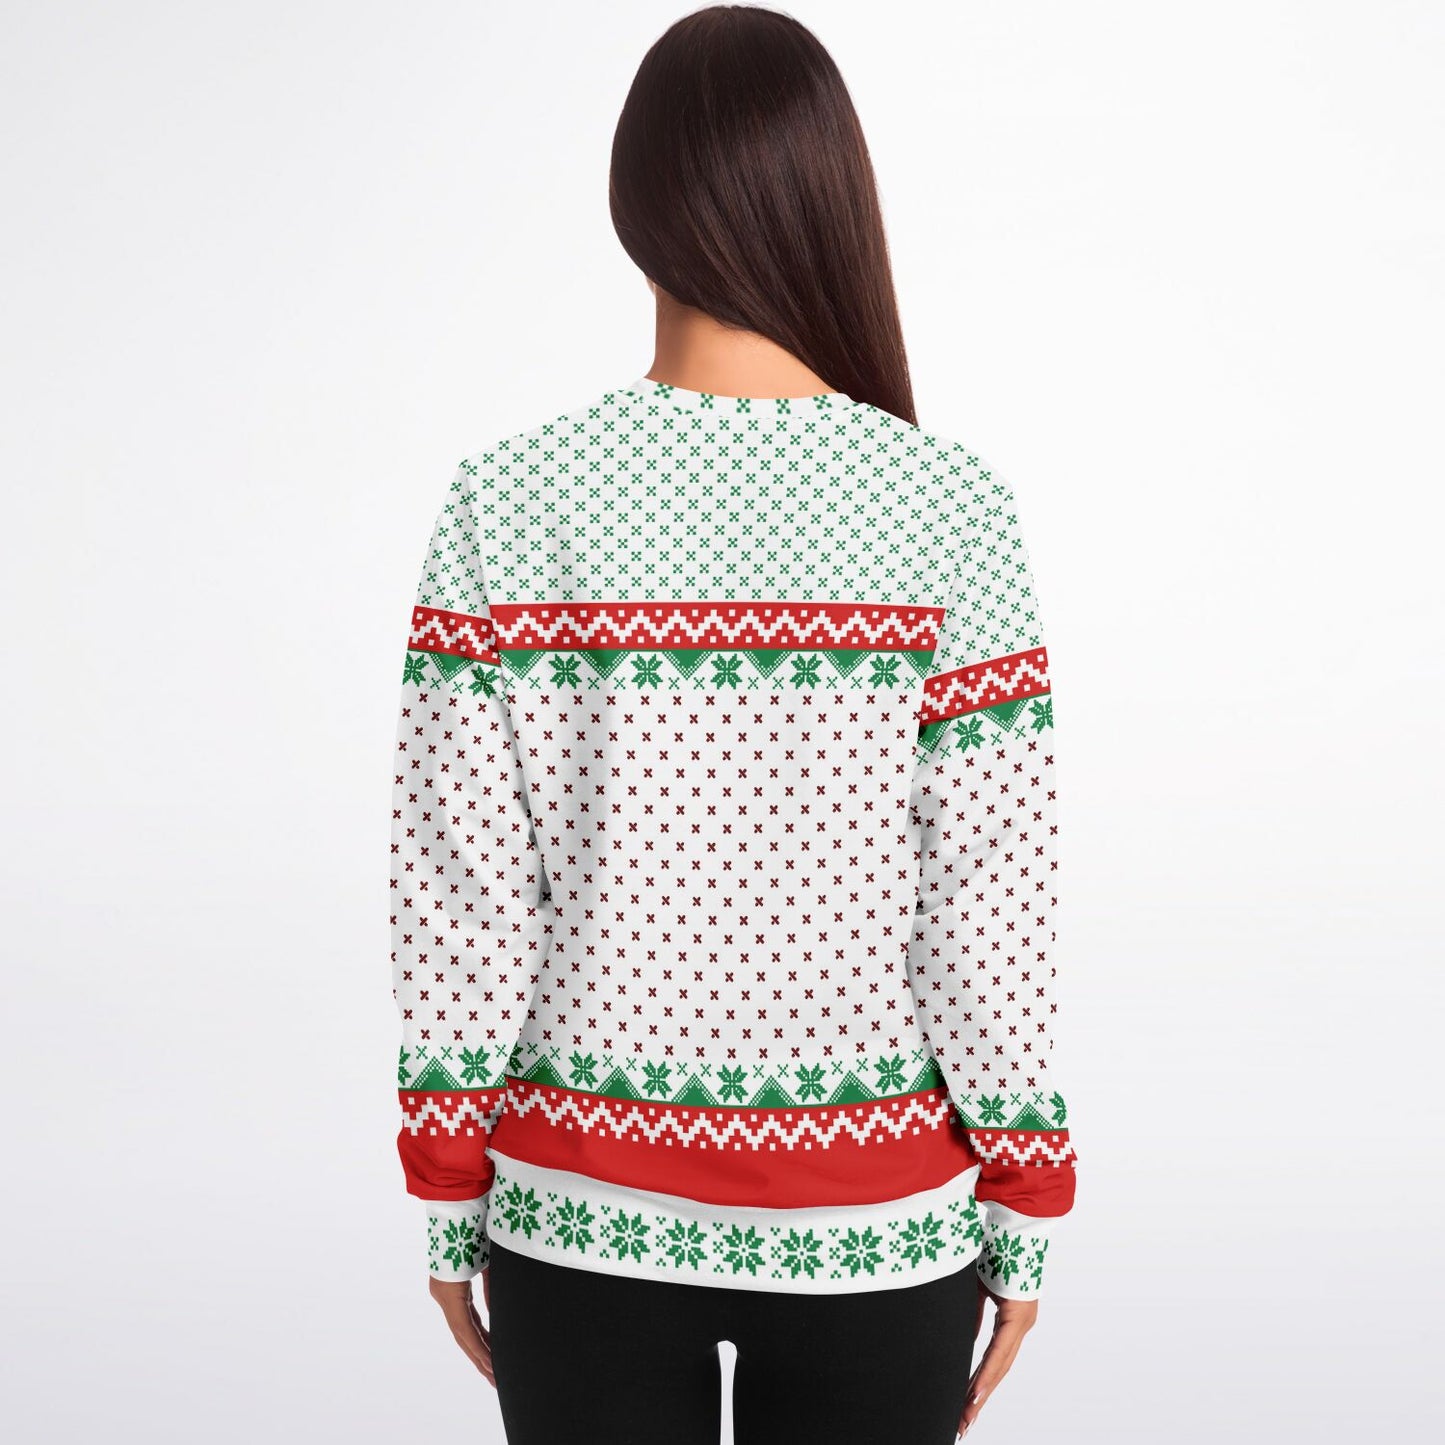 Fit for Christmas Ugly Sweater - Sport Finesse